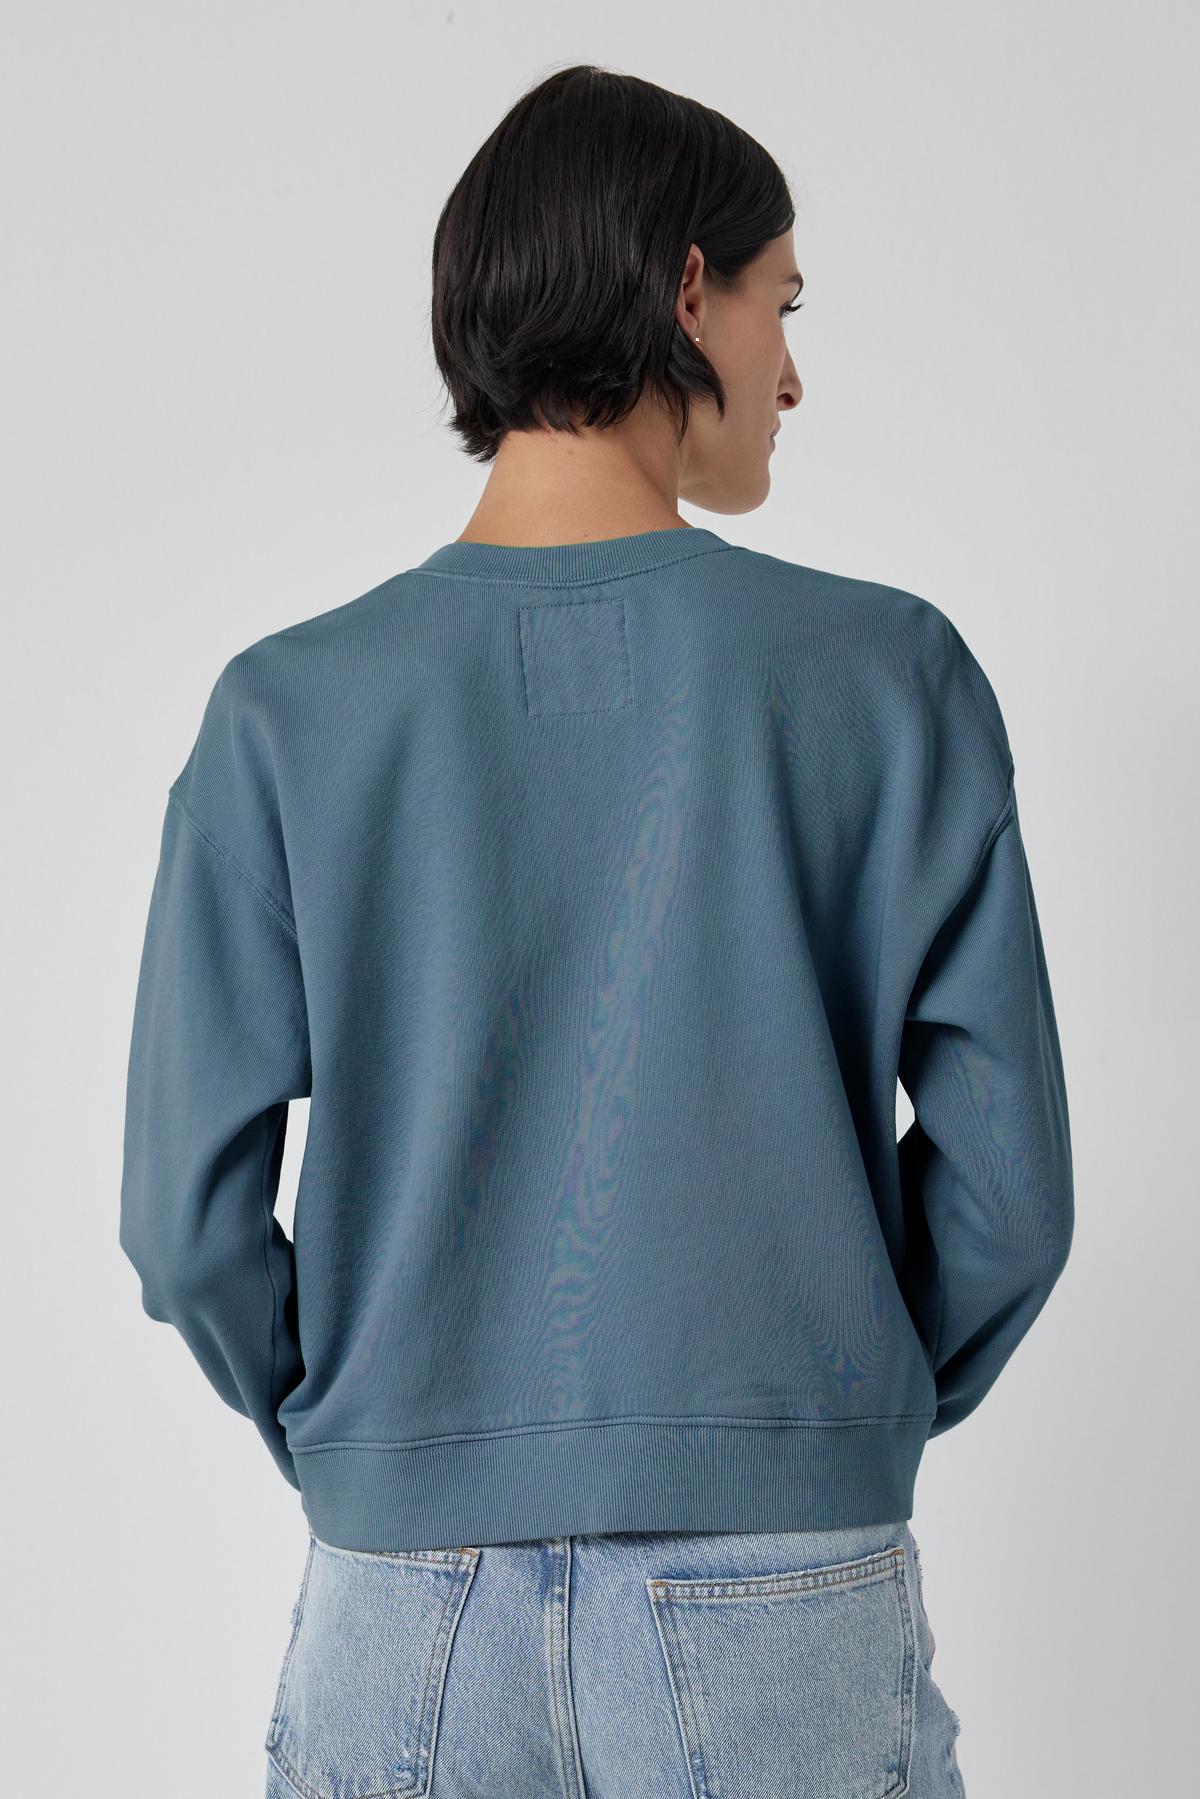 The back view of a woman wearing a blue Ynez Sweatshirt by Velvet by Jenny Graham with a dropped shoulder.-35721183756481